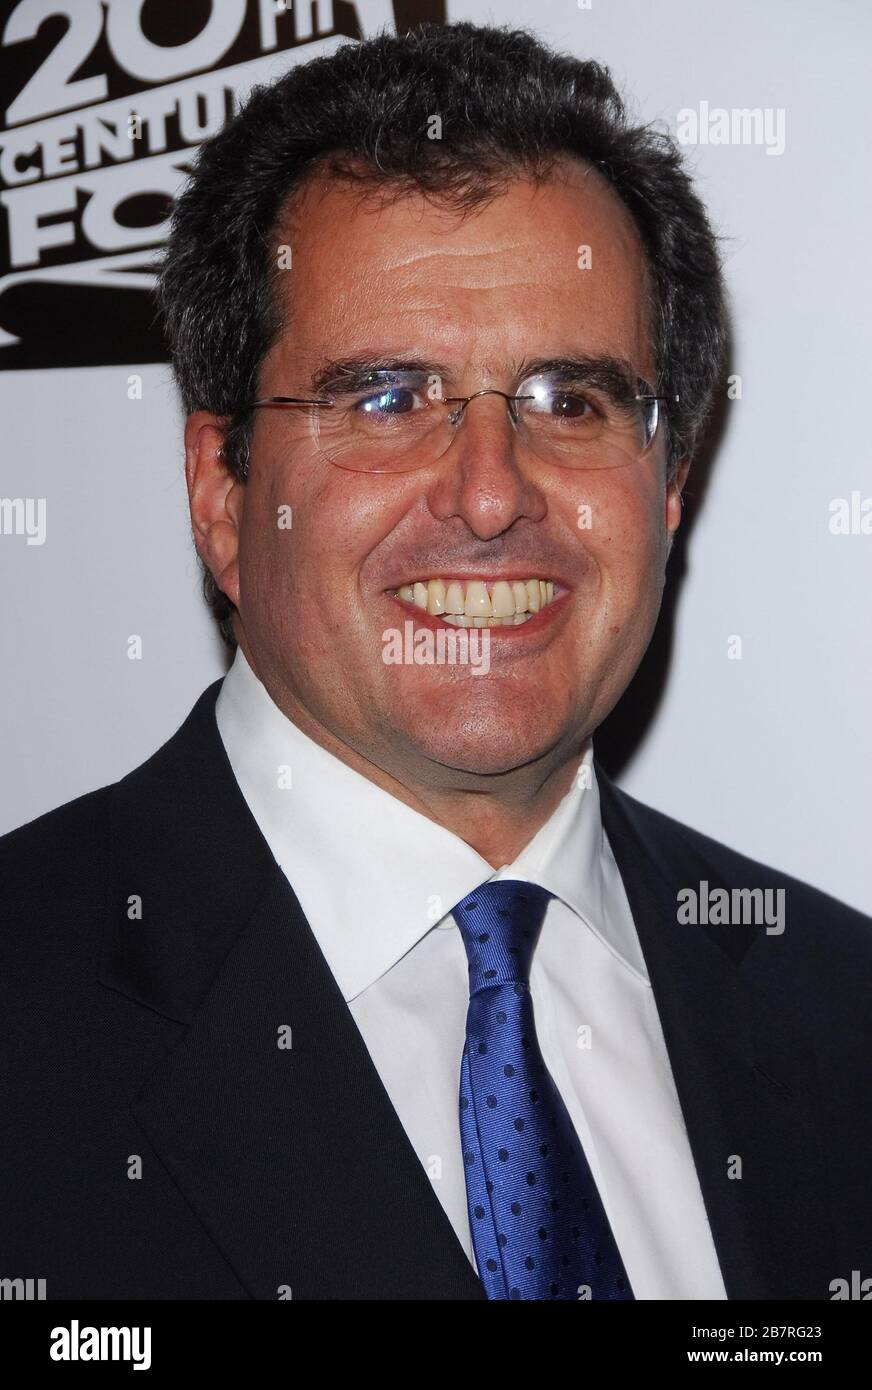 Peter Chernin at the Fulfillment Fund's Annual 'Stars 2006' Benefit Gala held at The Beverly Hilton Hotel in Beverly Hills, CA. The event took place on Monday, October 16, 2006.  Photo by: SBM / PictureLux - File Reference # 33984-7646SBMPLX Stock Photo